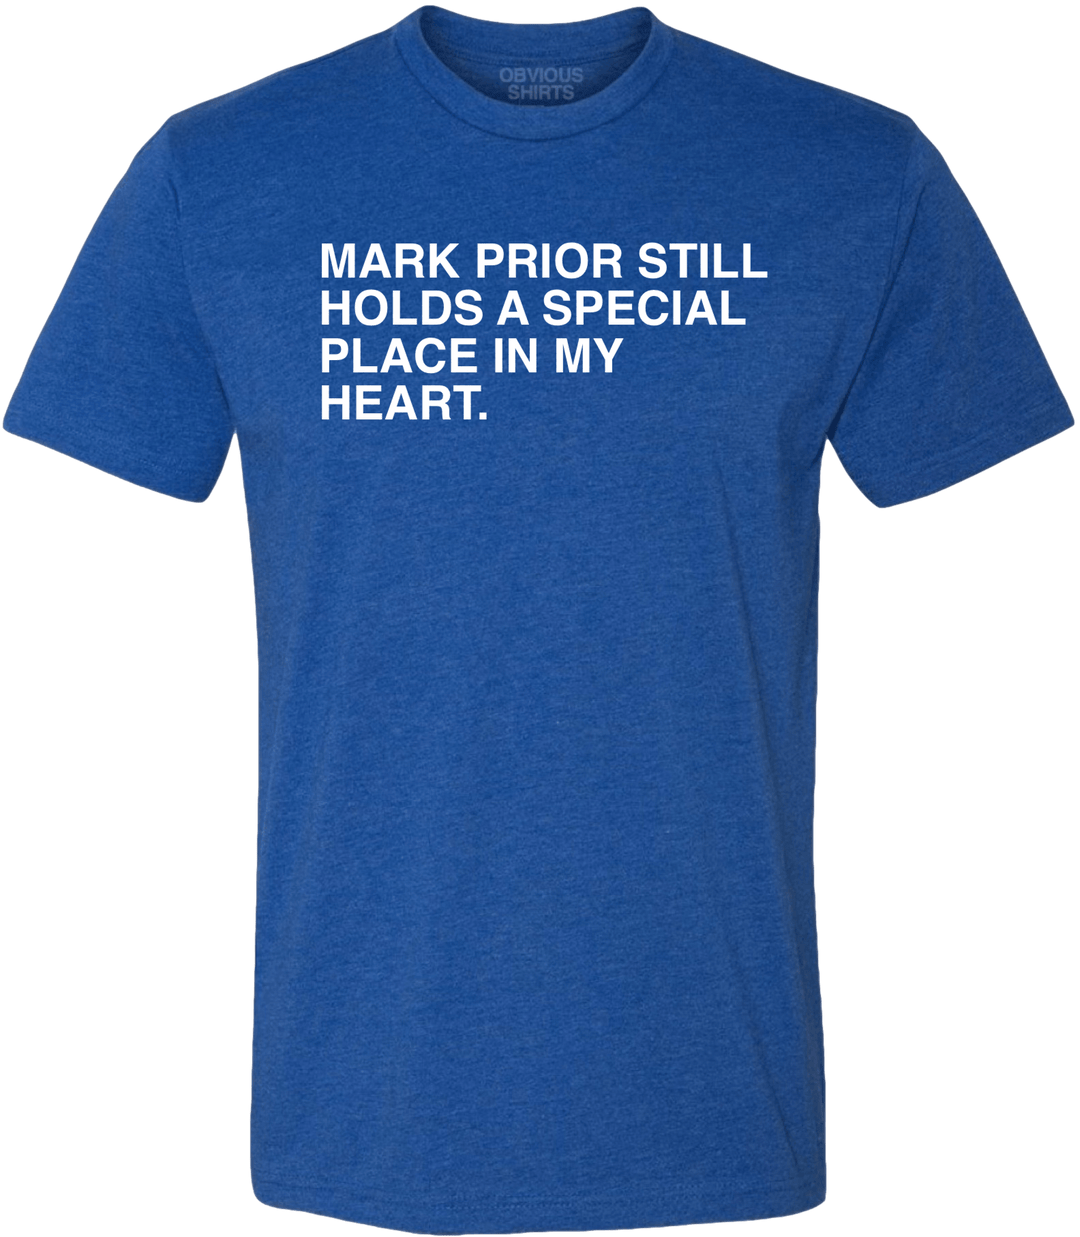 MARK PRIOR STILL HOLDS A SPECIAL PLACE IN MY HEART. - OBVIOUS SHIRTS.